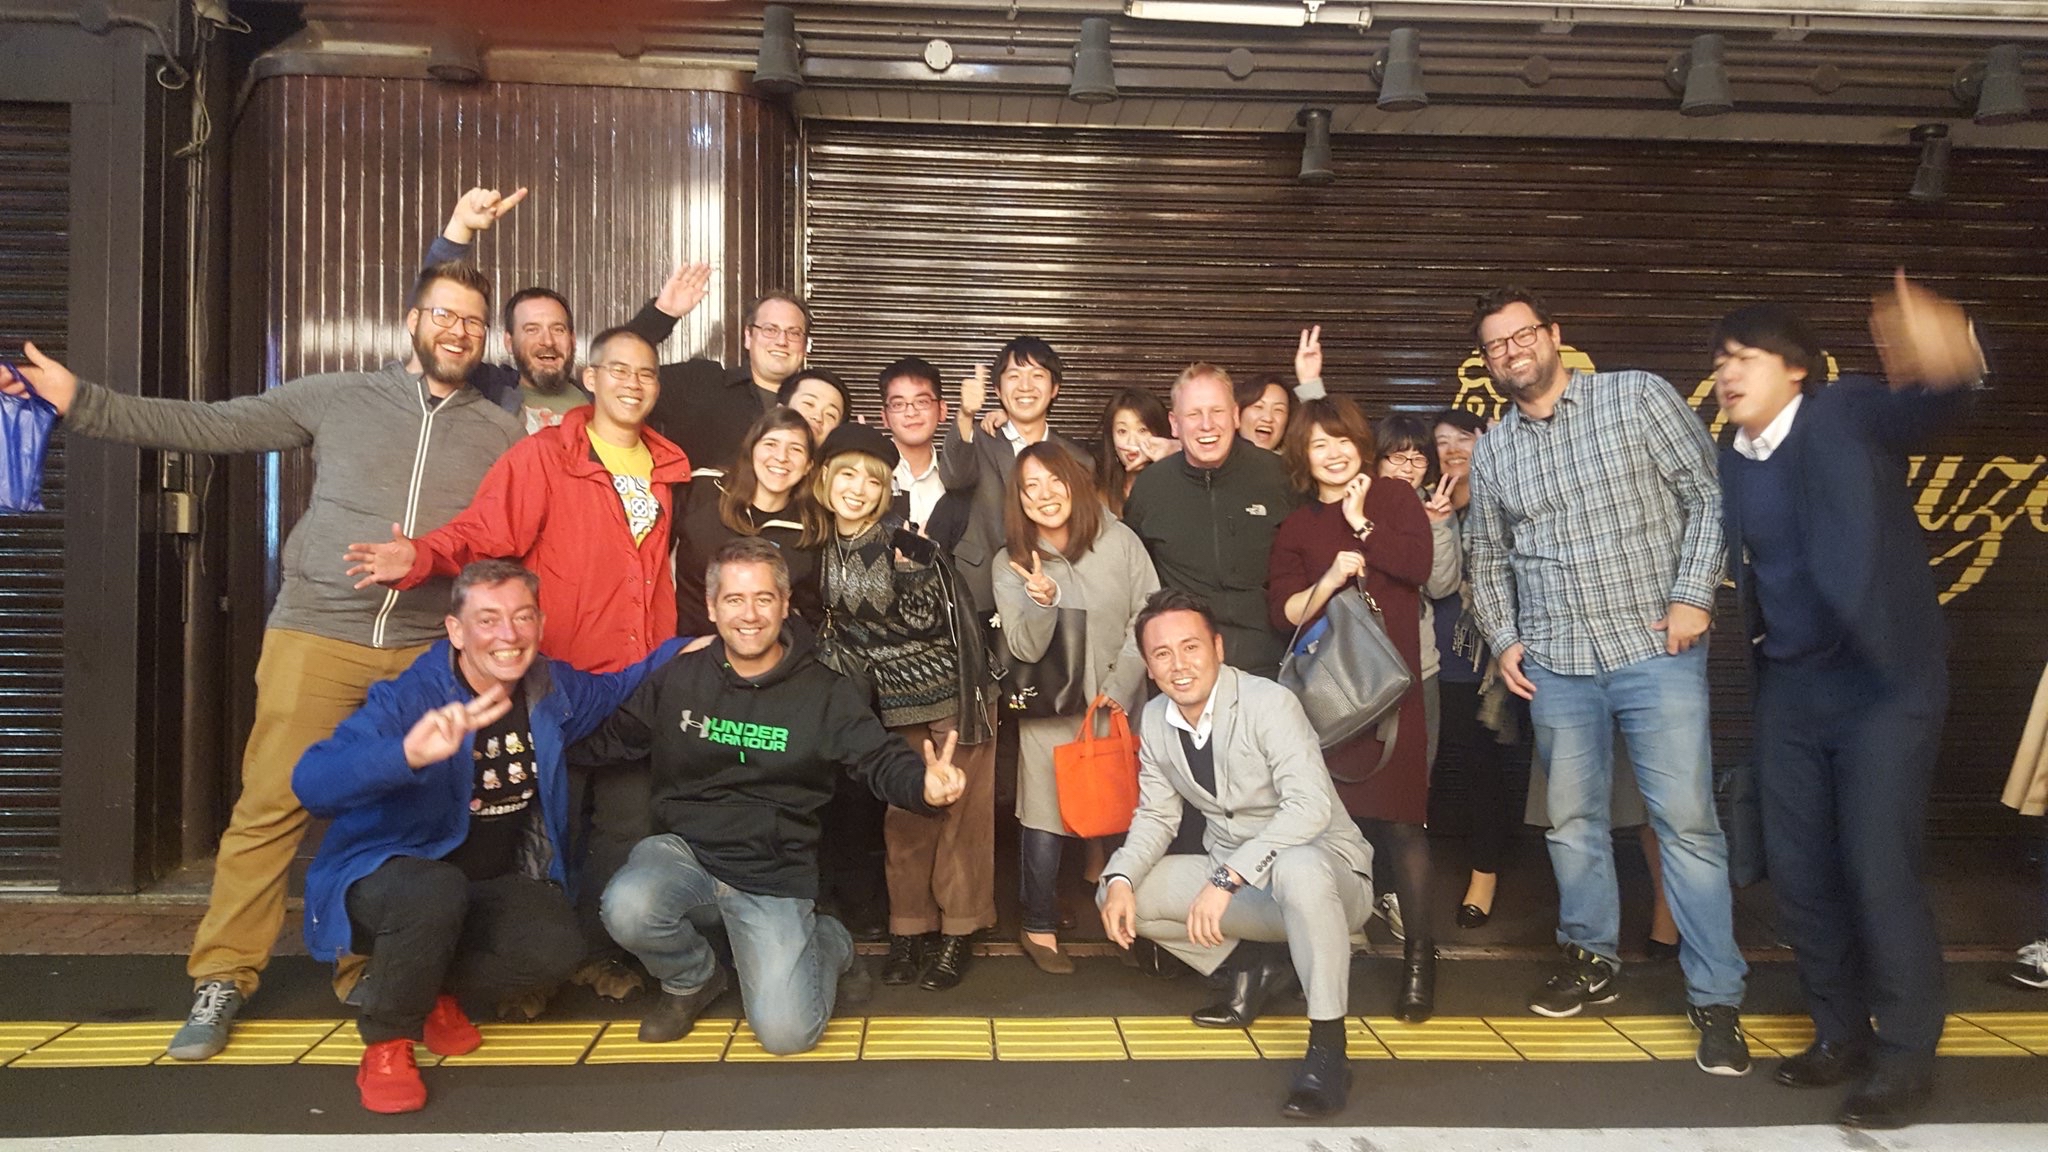 The 2018 Plone Foundation Board with a group of random people in Tokyo